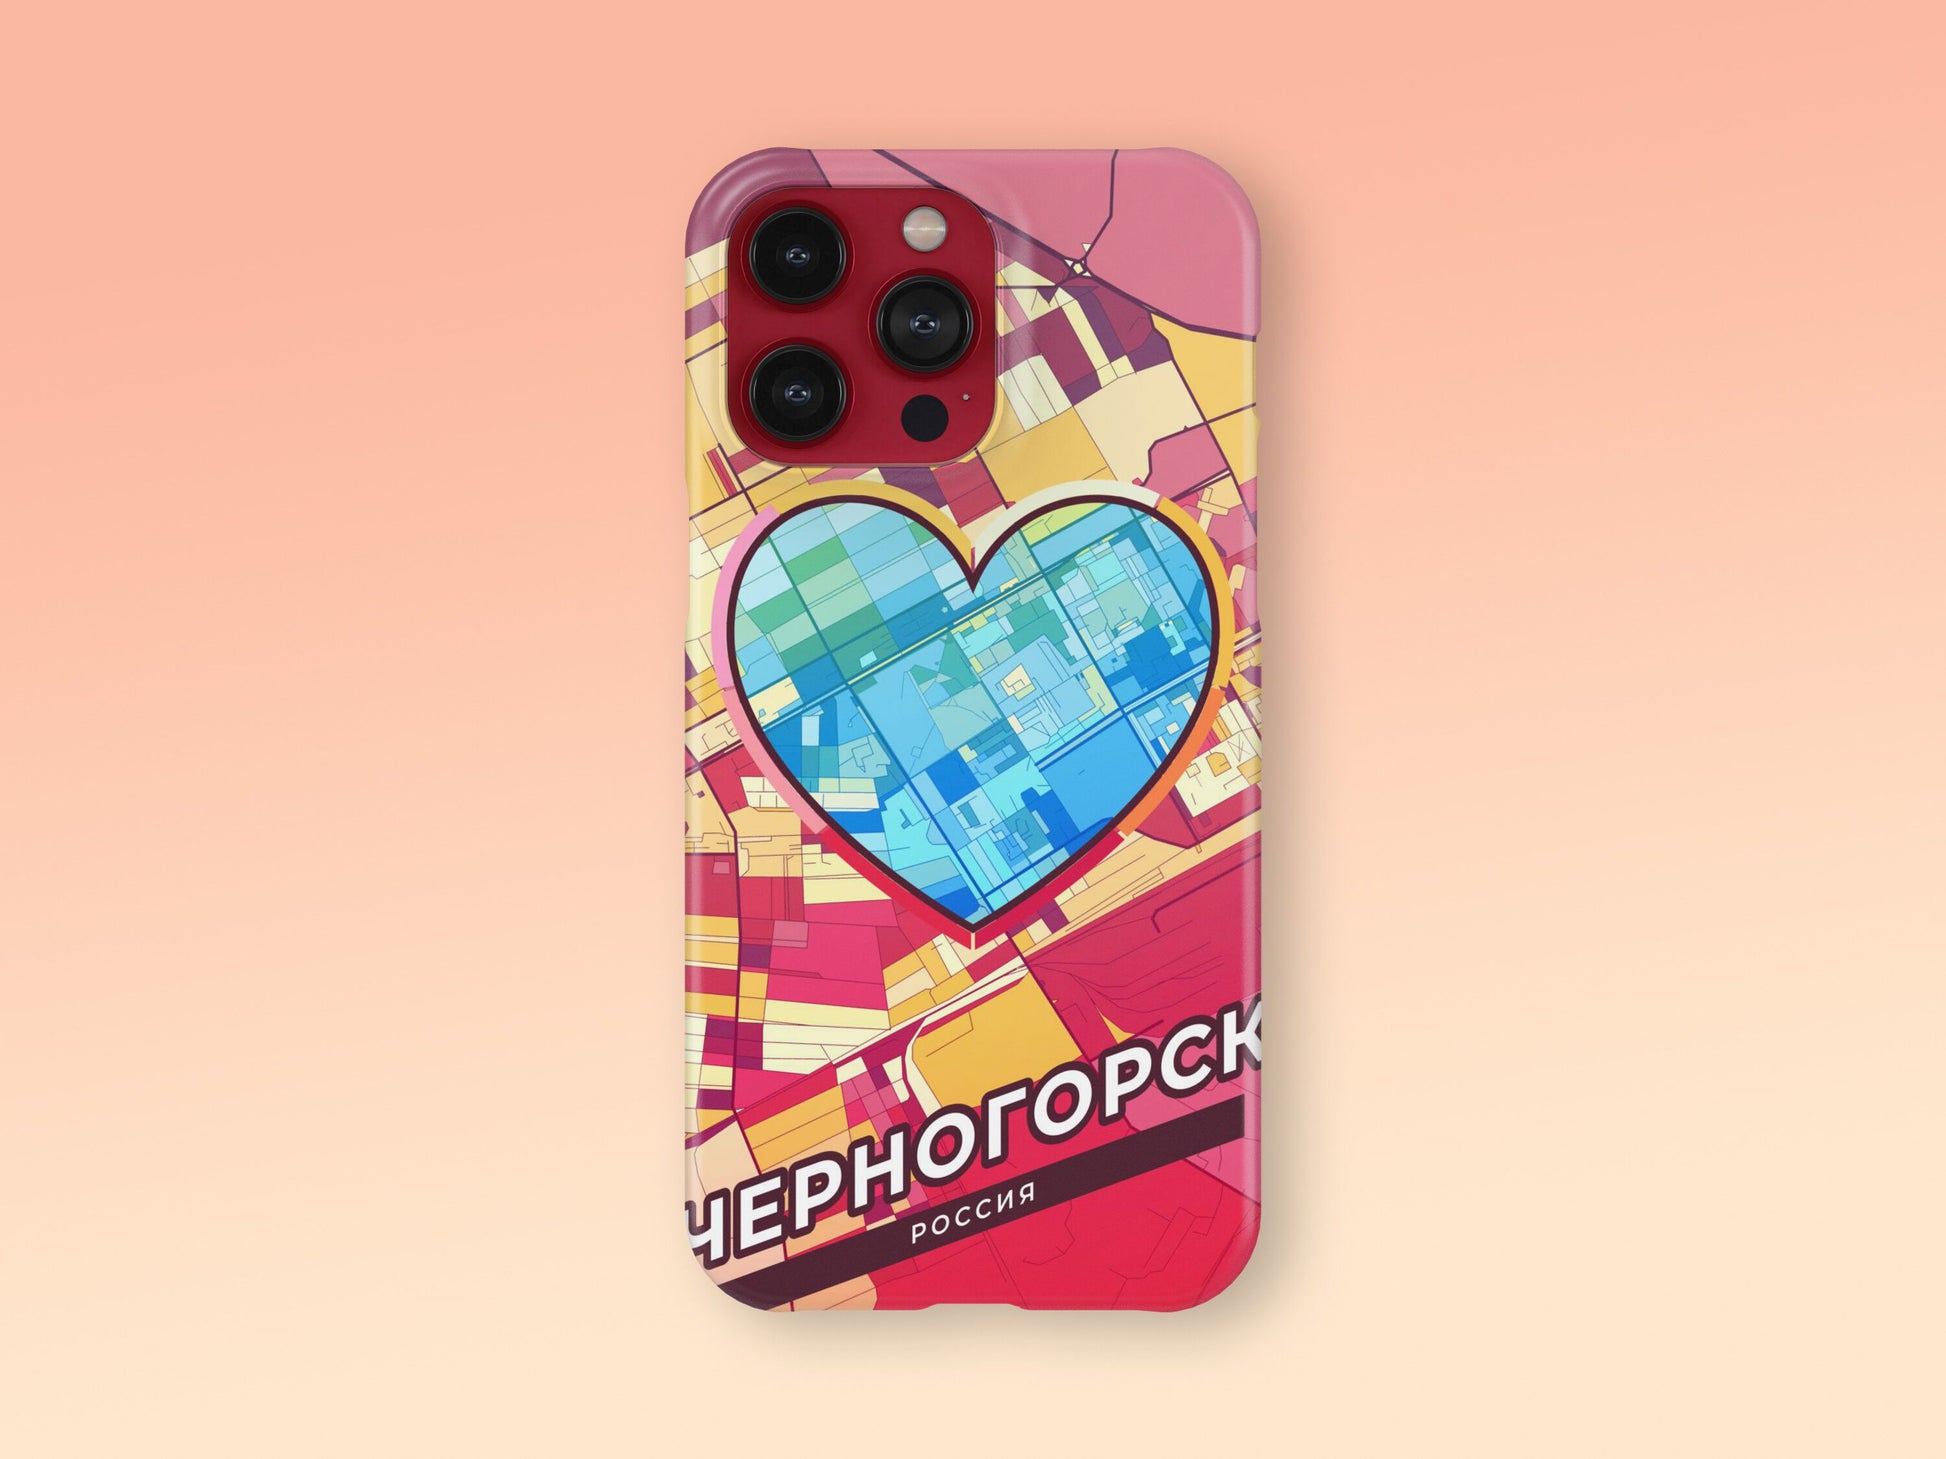 Chernogorsk Russia slim phone case with colorful icon. Birthday, wedding or housewarming gift. Couple match cases. 2